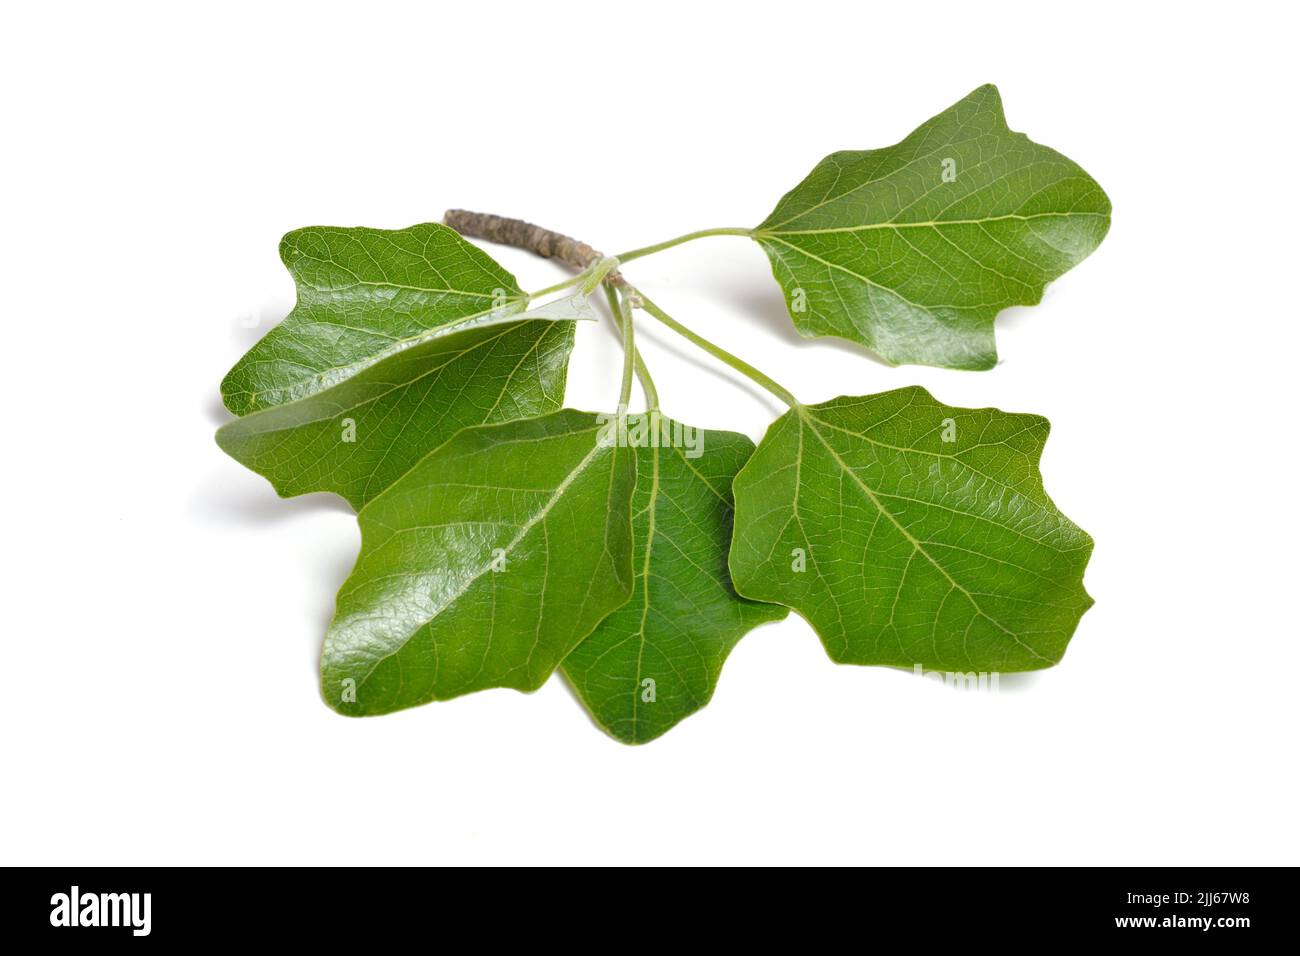 Populus alba, commonly called silver poplar, silverleaf poplar, or white poplar. Isolated on white background. Stock Photo